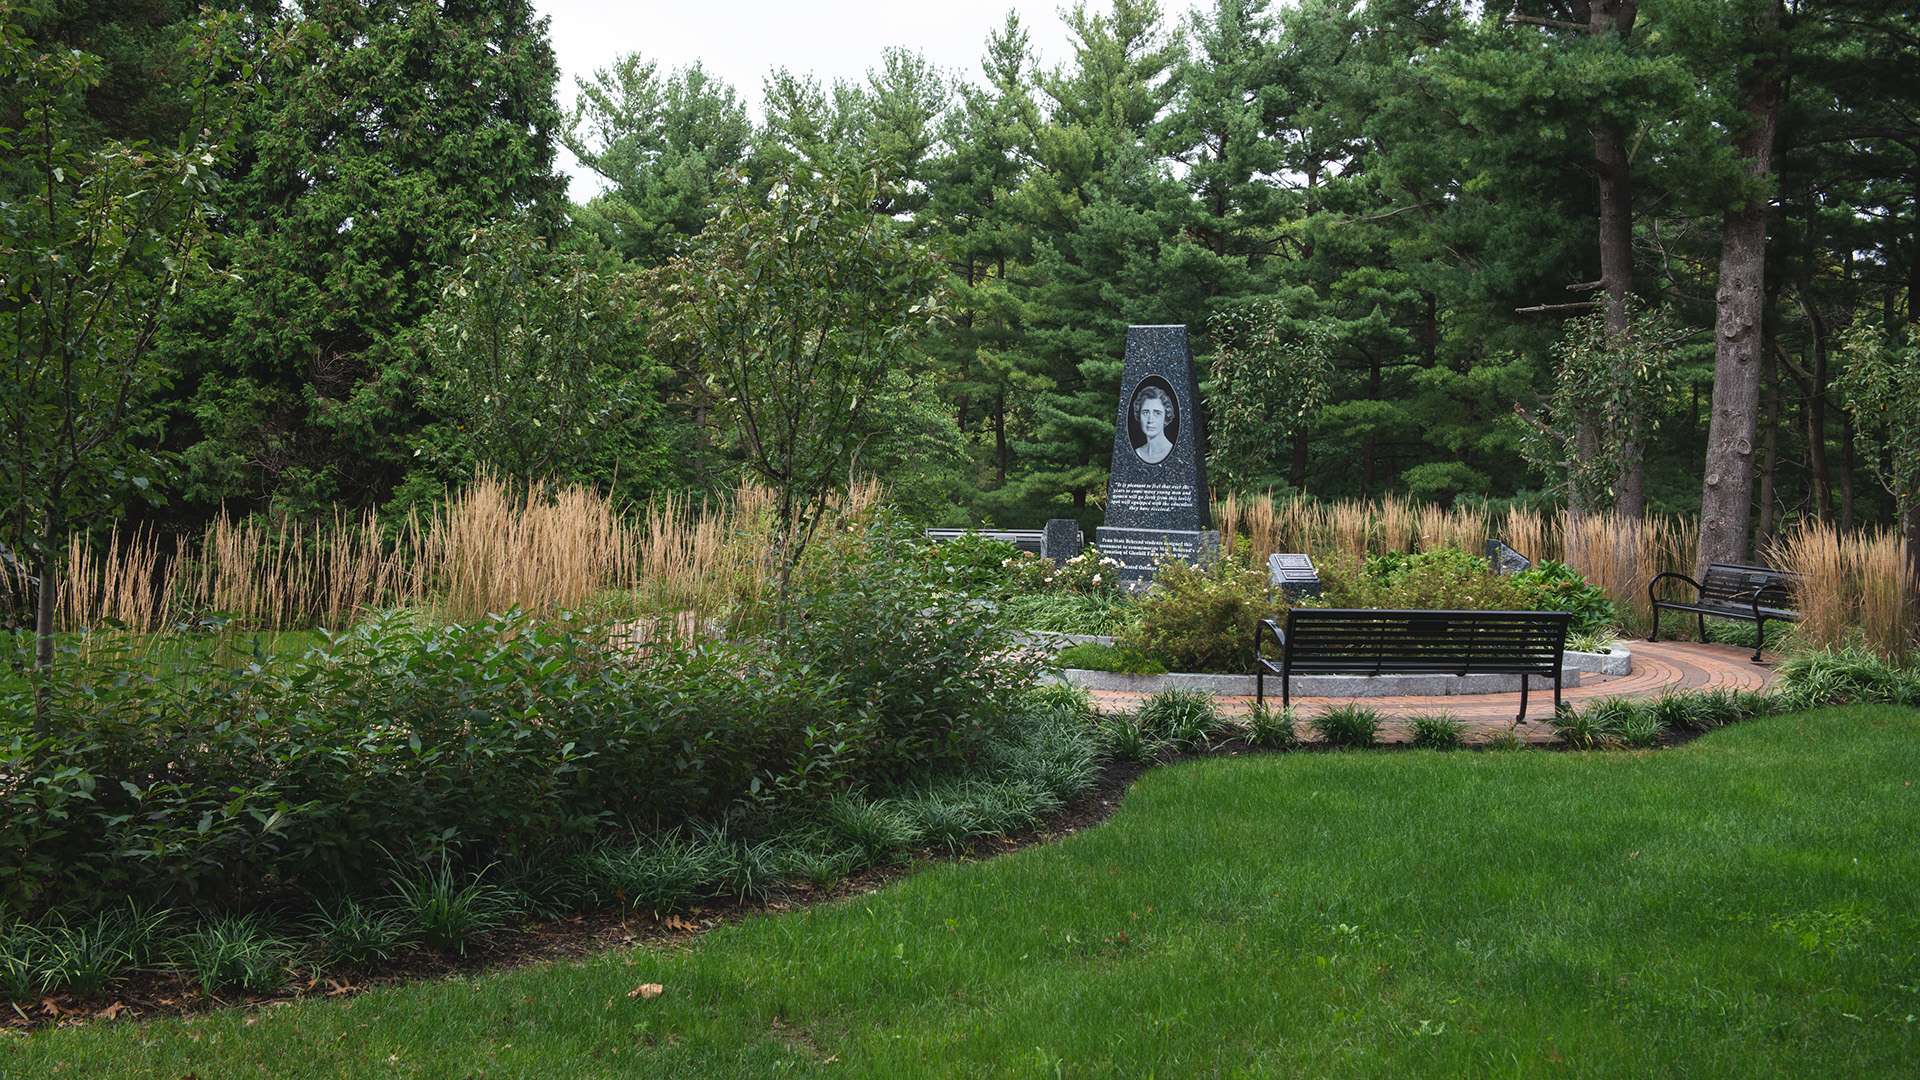 Mary Behrend Monument